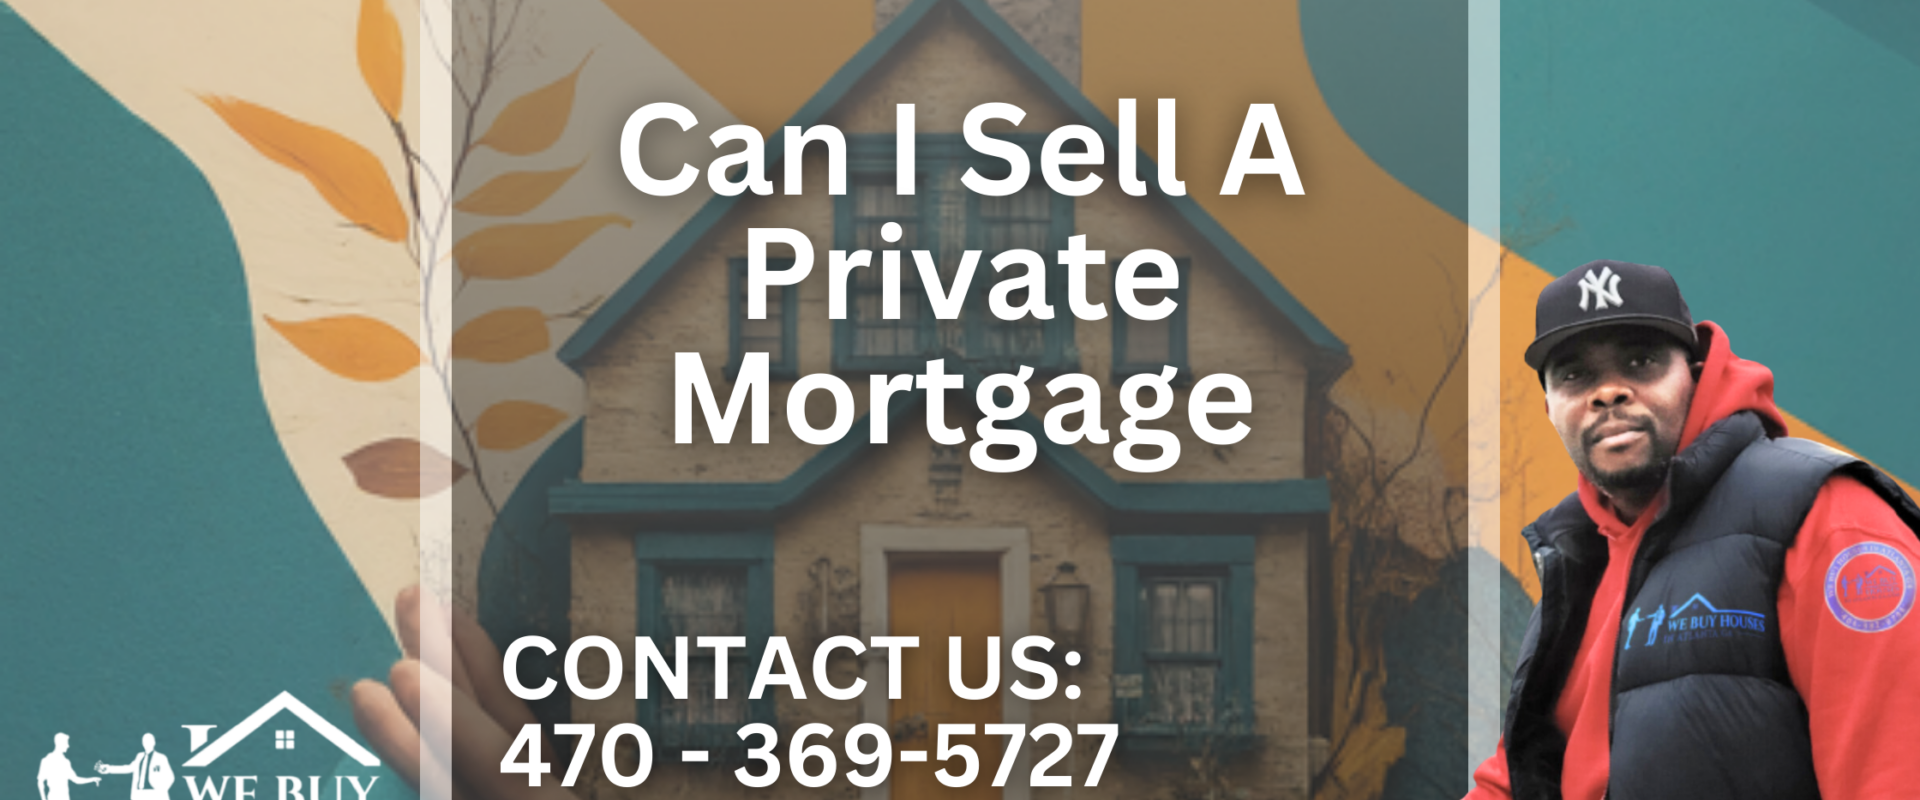 Can I Sell A Private Mortgage